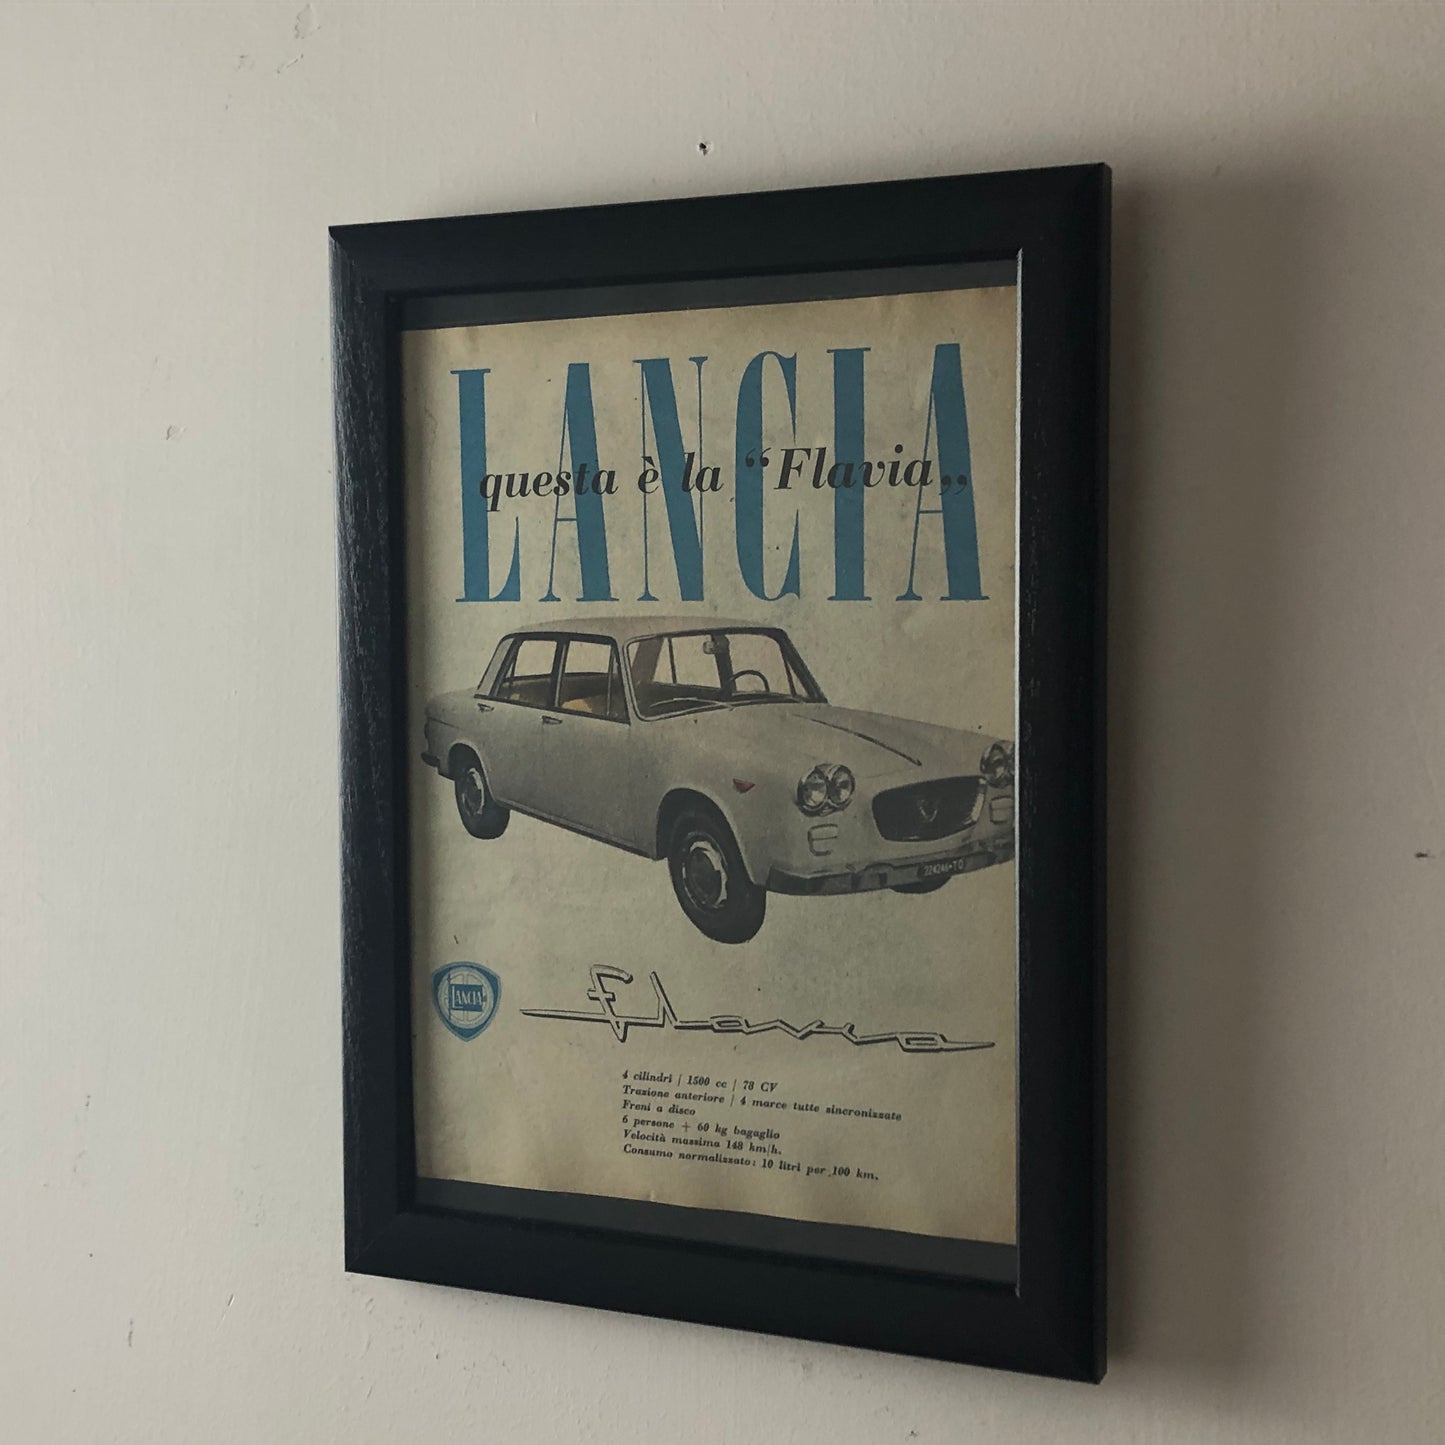 Lancia, Advertisement Year 1960 This is the Lancia Flavia